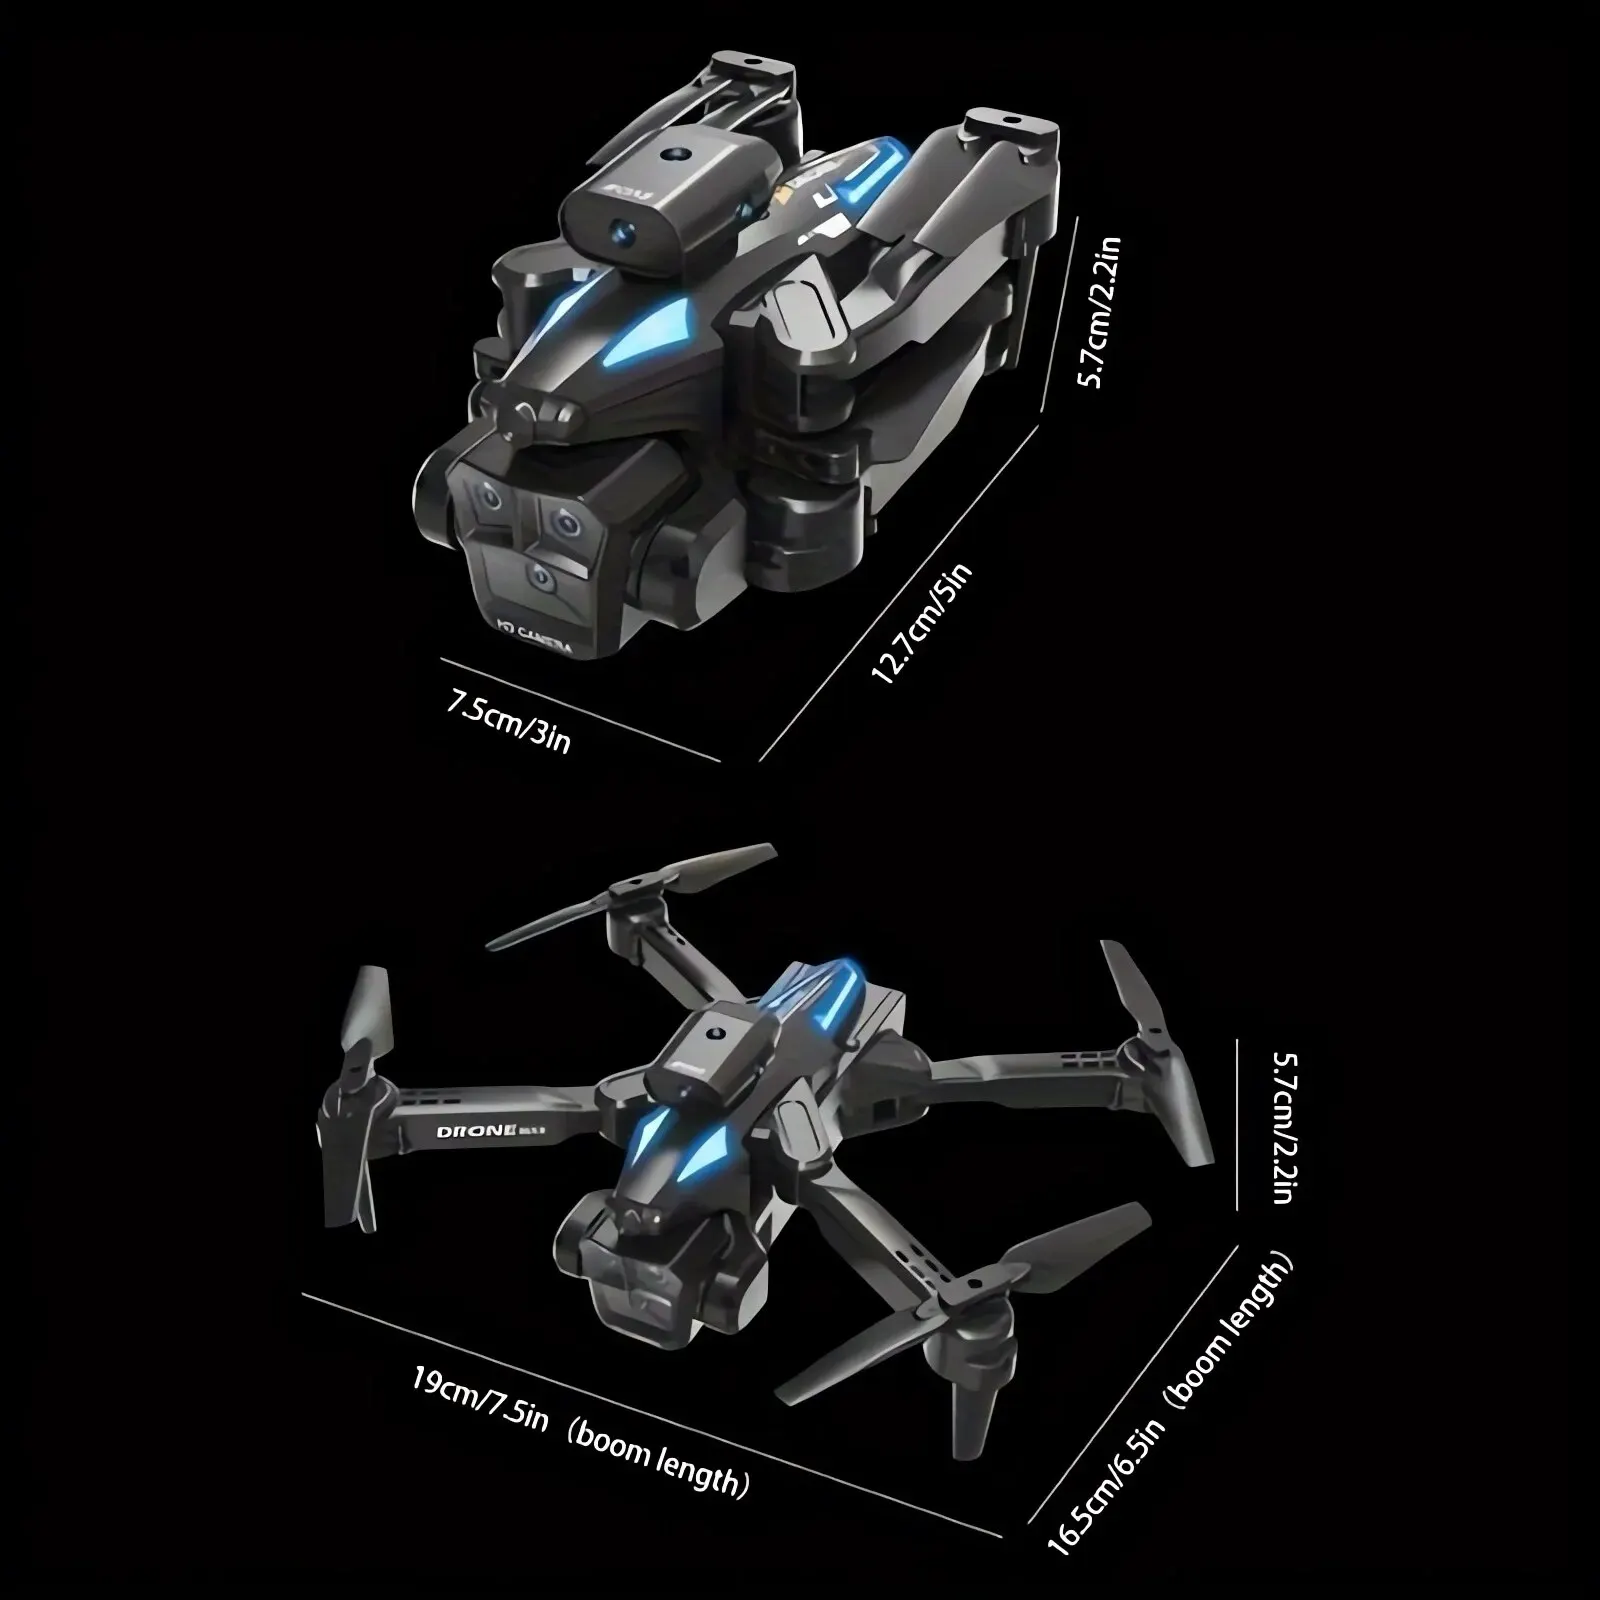 New C10 Drone GPS 8K HD Three Cameras Optical Flow Obstacle Avoidance Aerial Photography RC Foldable Quadcopter Toys Gifts